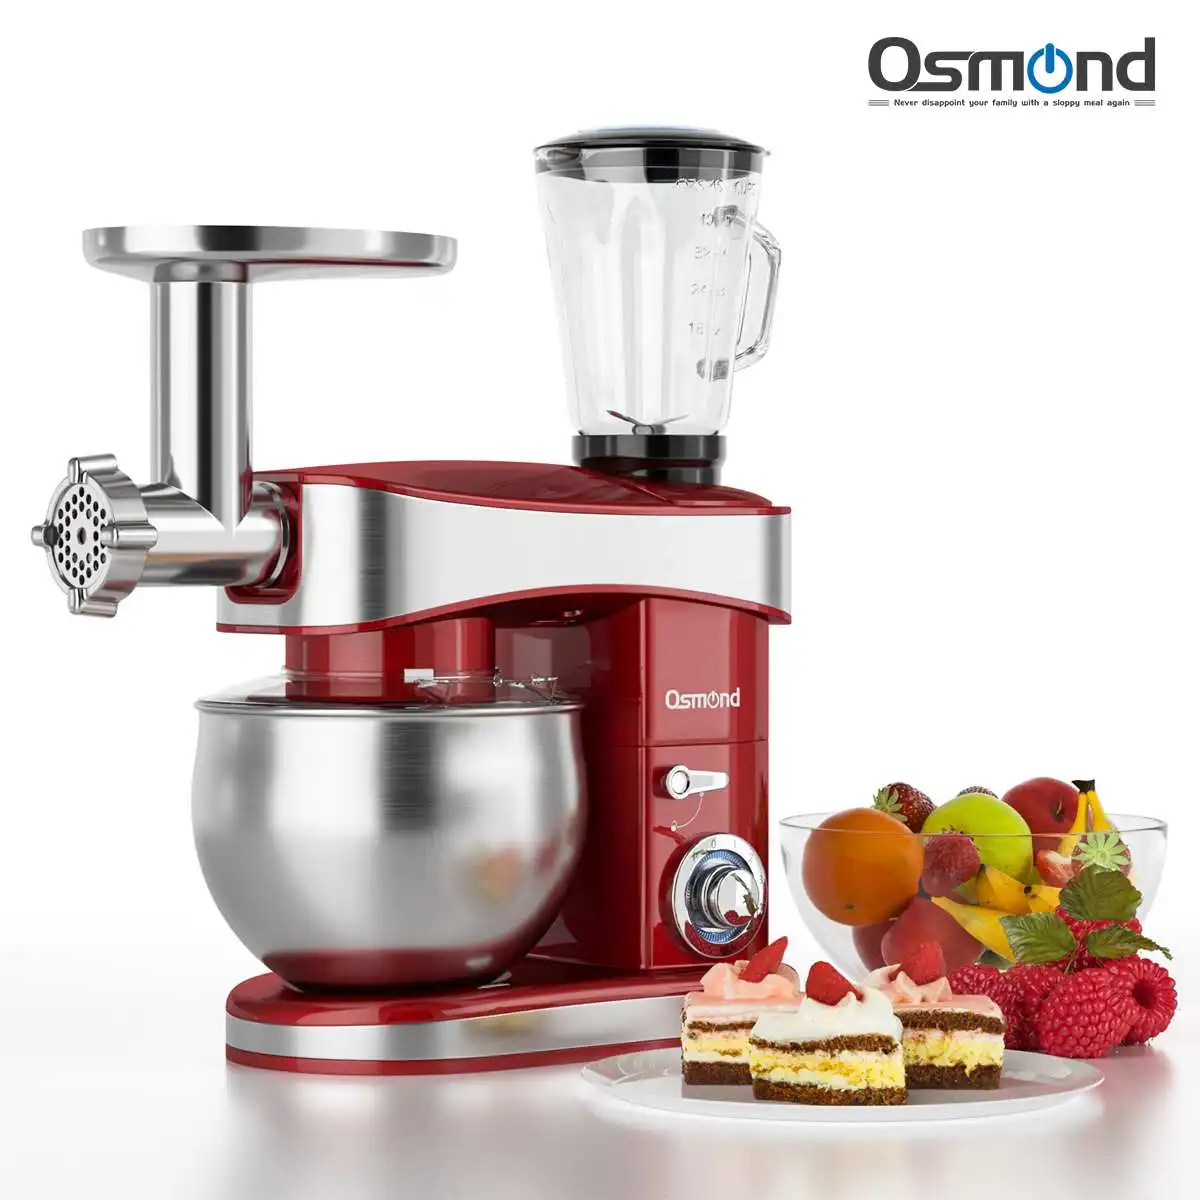 

OSMOND 6.5L 1200W Stainless Steel Bowl 6-speed Kitchen Food Stand Mixer Cream Egg Whisk Whip Dough Kneading Mixer Bread Blender